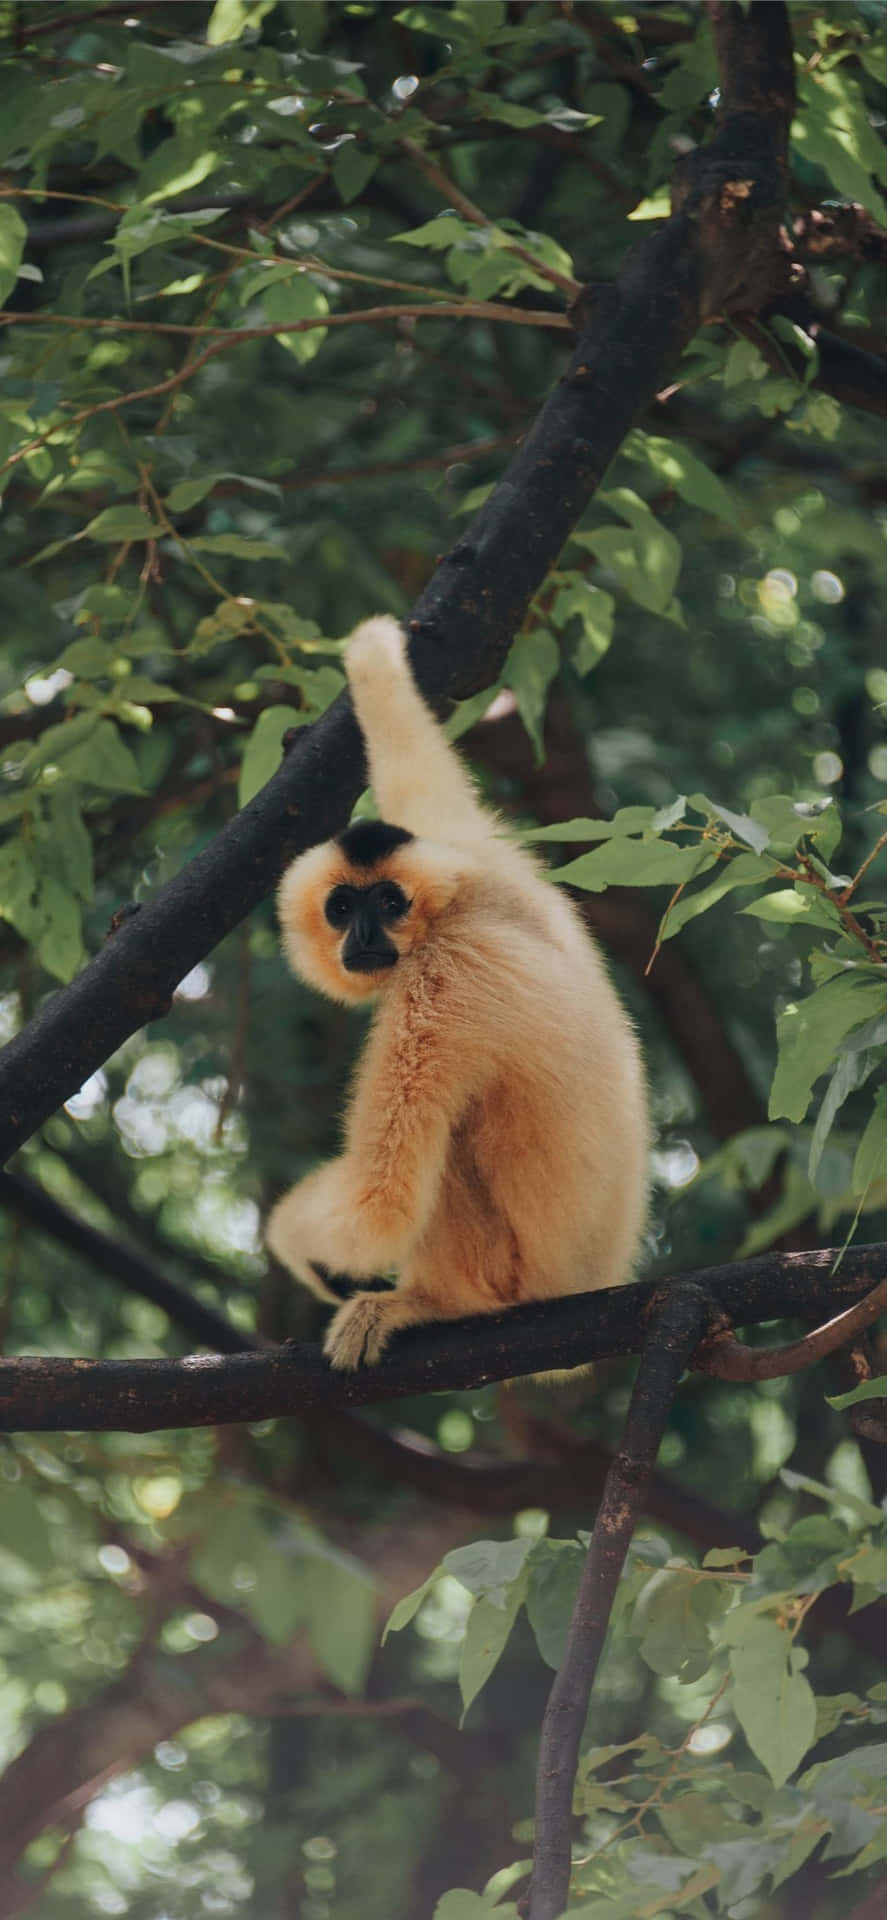 "Experience the Fun and Style of Iphone X Gibbon"